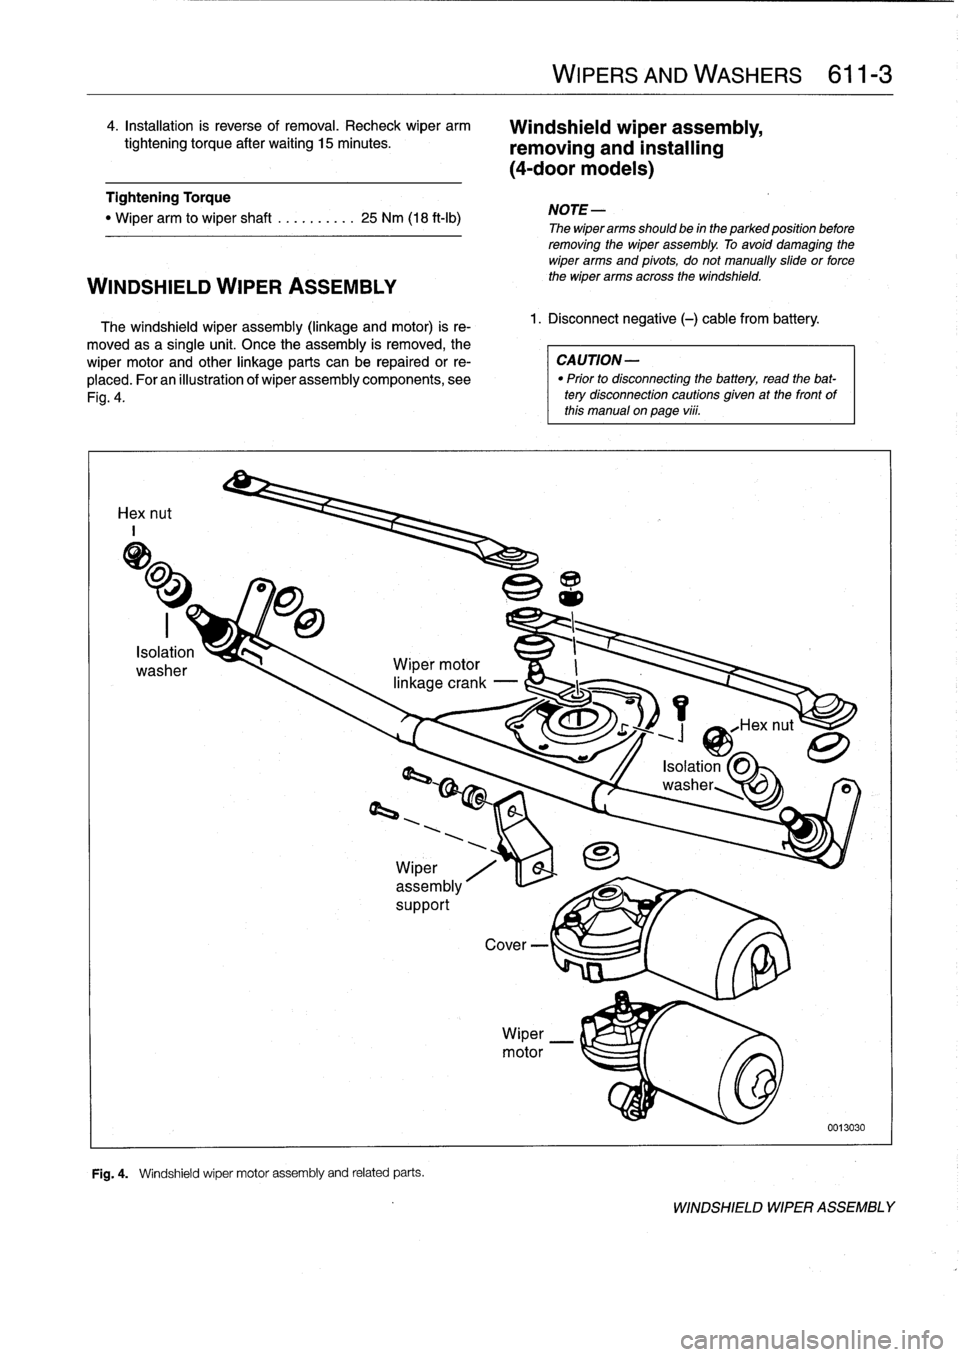 BMW 323i 1993 E36 Workshop Manual 
4
.
Installation
is
reverse
of
removal
.
Recheck
wiper
arm

tightening
torque
after
waiting
15minutes
.

Tightening
Torque

"
Wiper
arm
to
wiper
shaft
..........
25
Nm
(18
ft-Ib)

WINDSHIELD
WIPER
AS